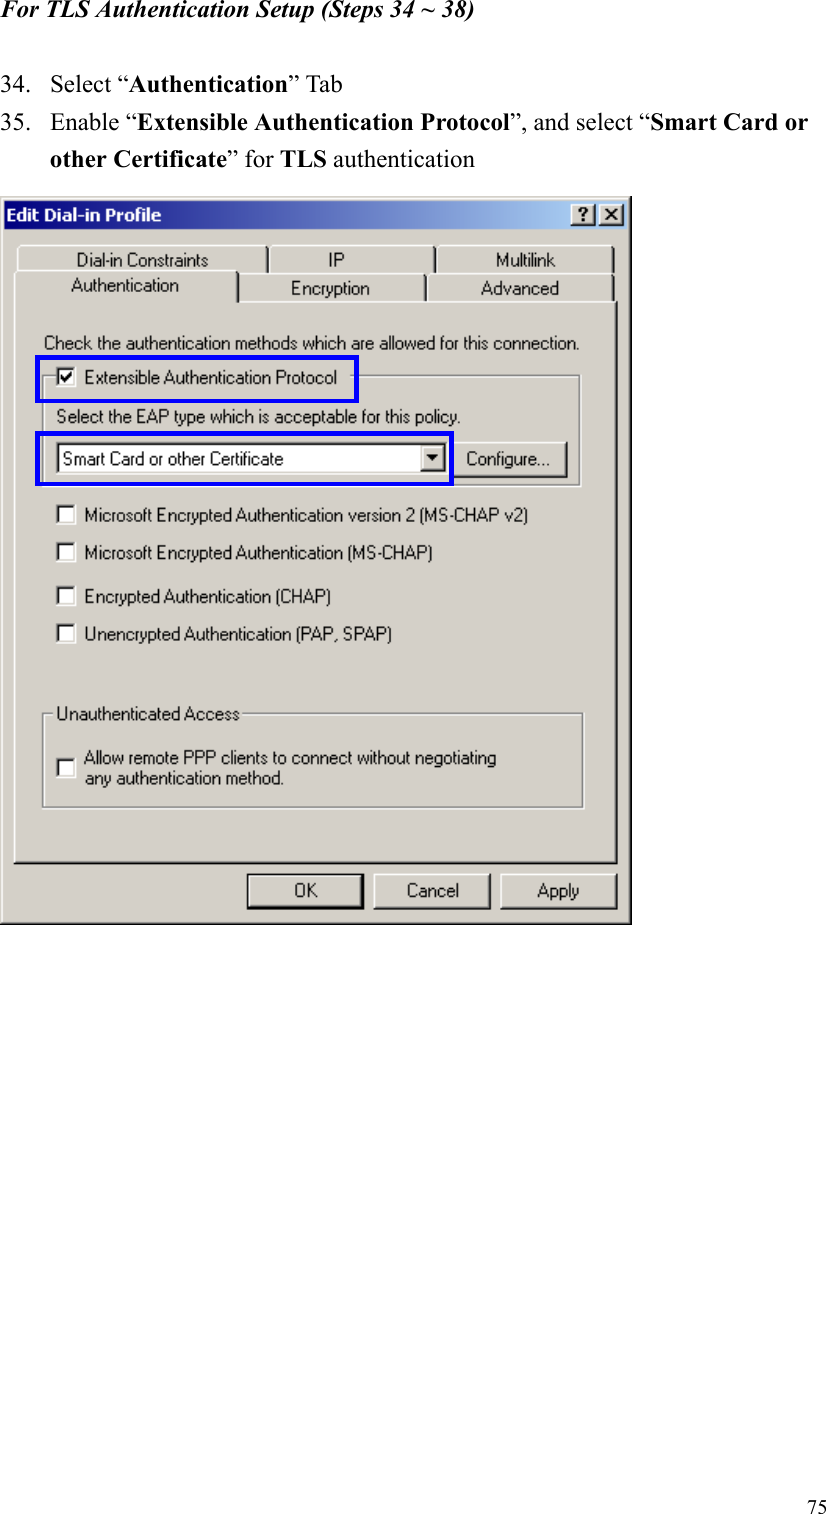 75For TLS Authentication Setup (Steps 34 ~ 38)34. Select “Authentication” Tab35. Enable “Extensible Authentication Protocol”, and select “Smart Card orother Certificate” for TLS authentication